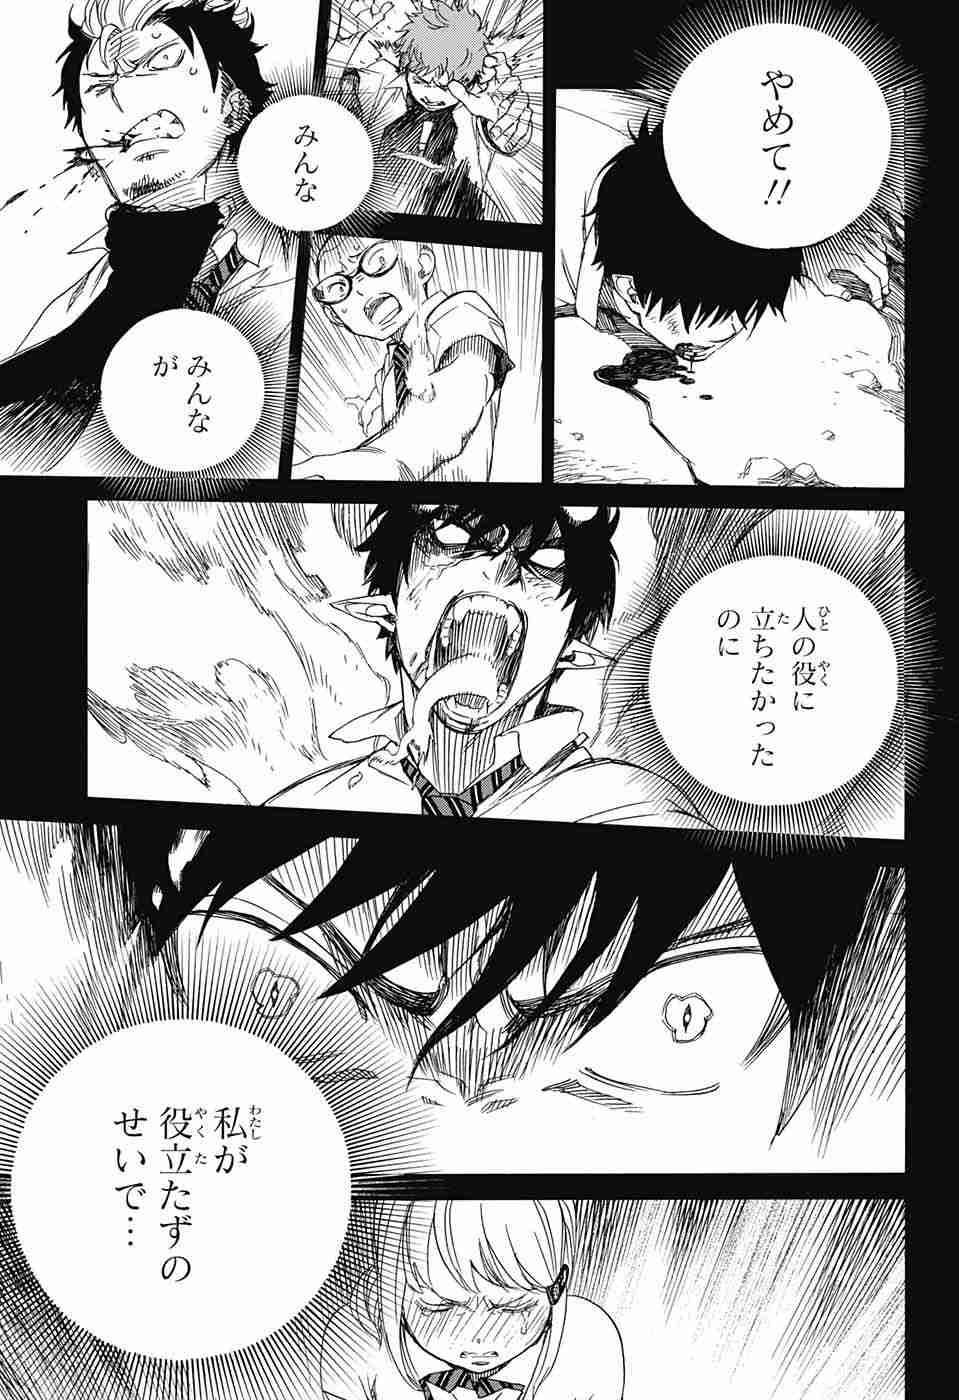 Ao no Exorcist - Chapter 83 - Page 3